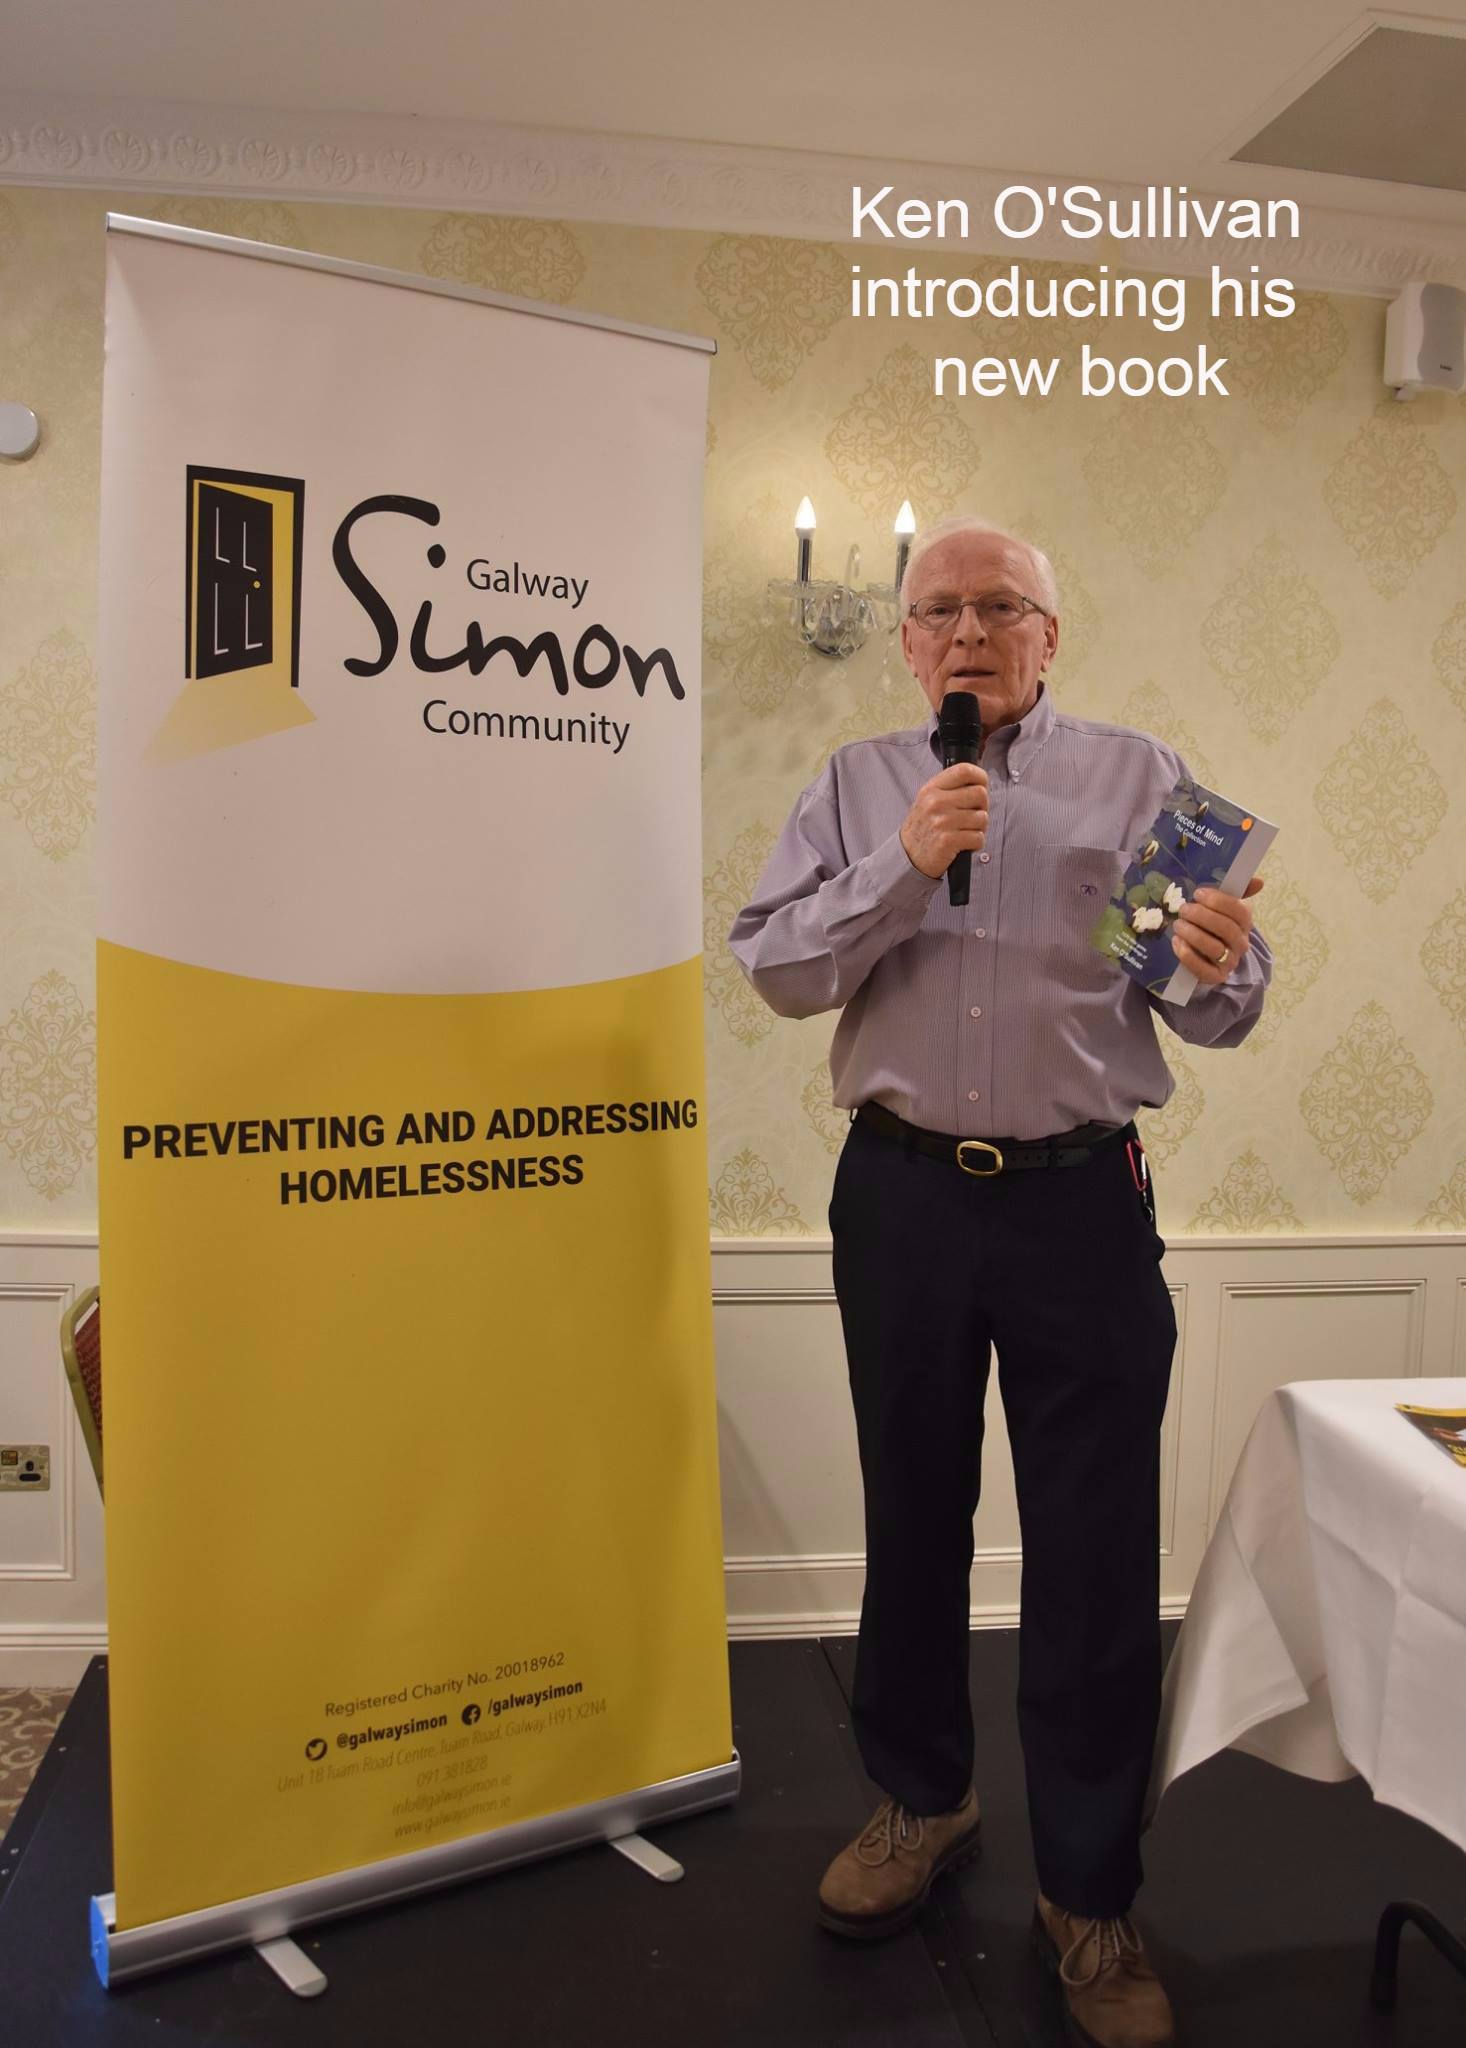 Ken O’Sullivan (1964), launches his book, 'Pieces of Mind: The Collection'